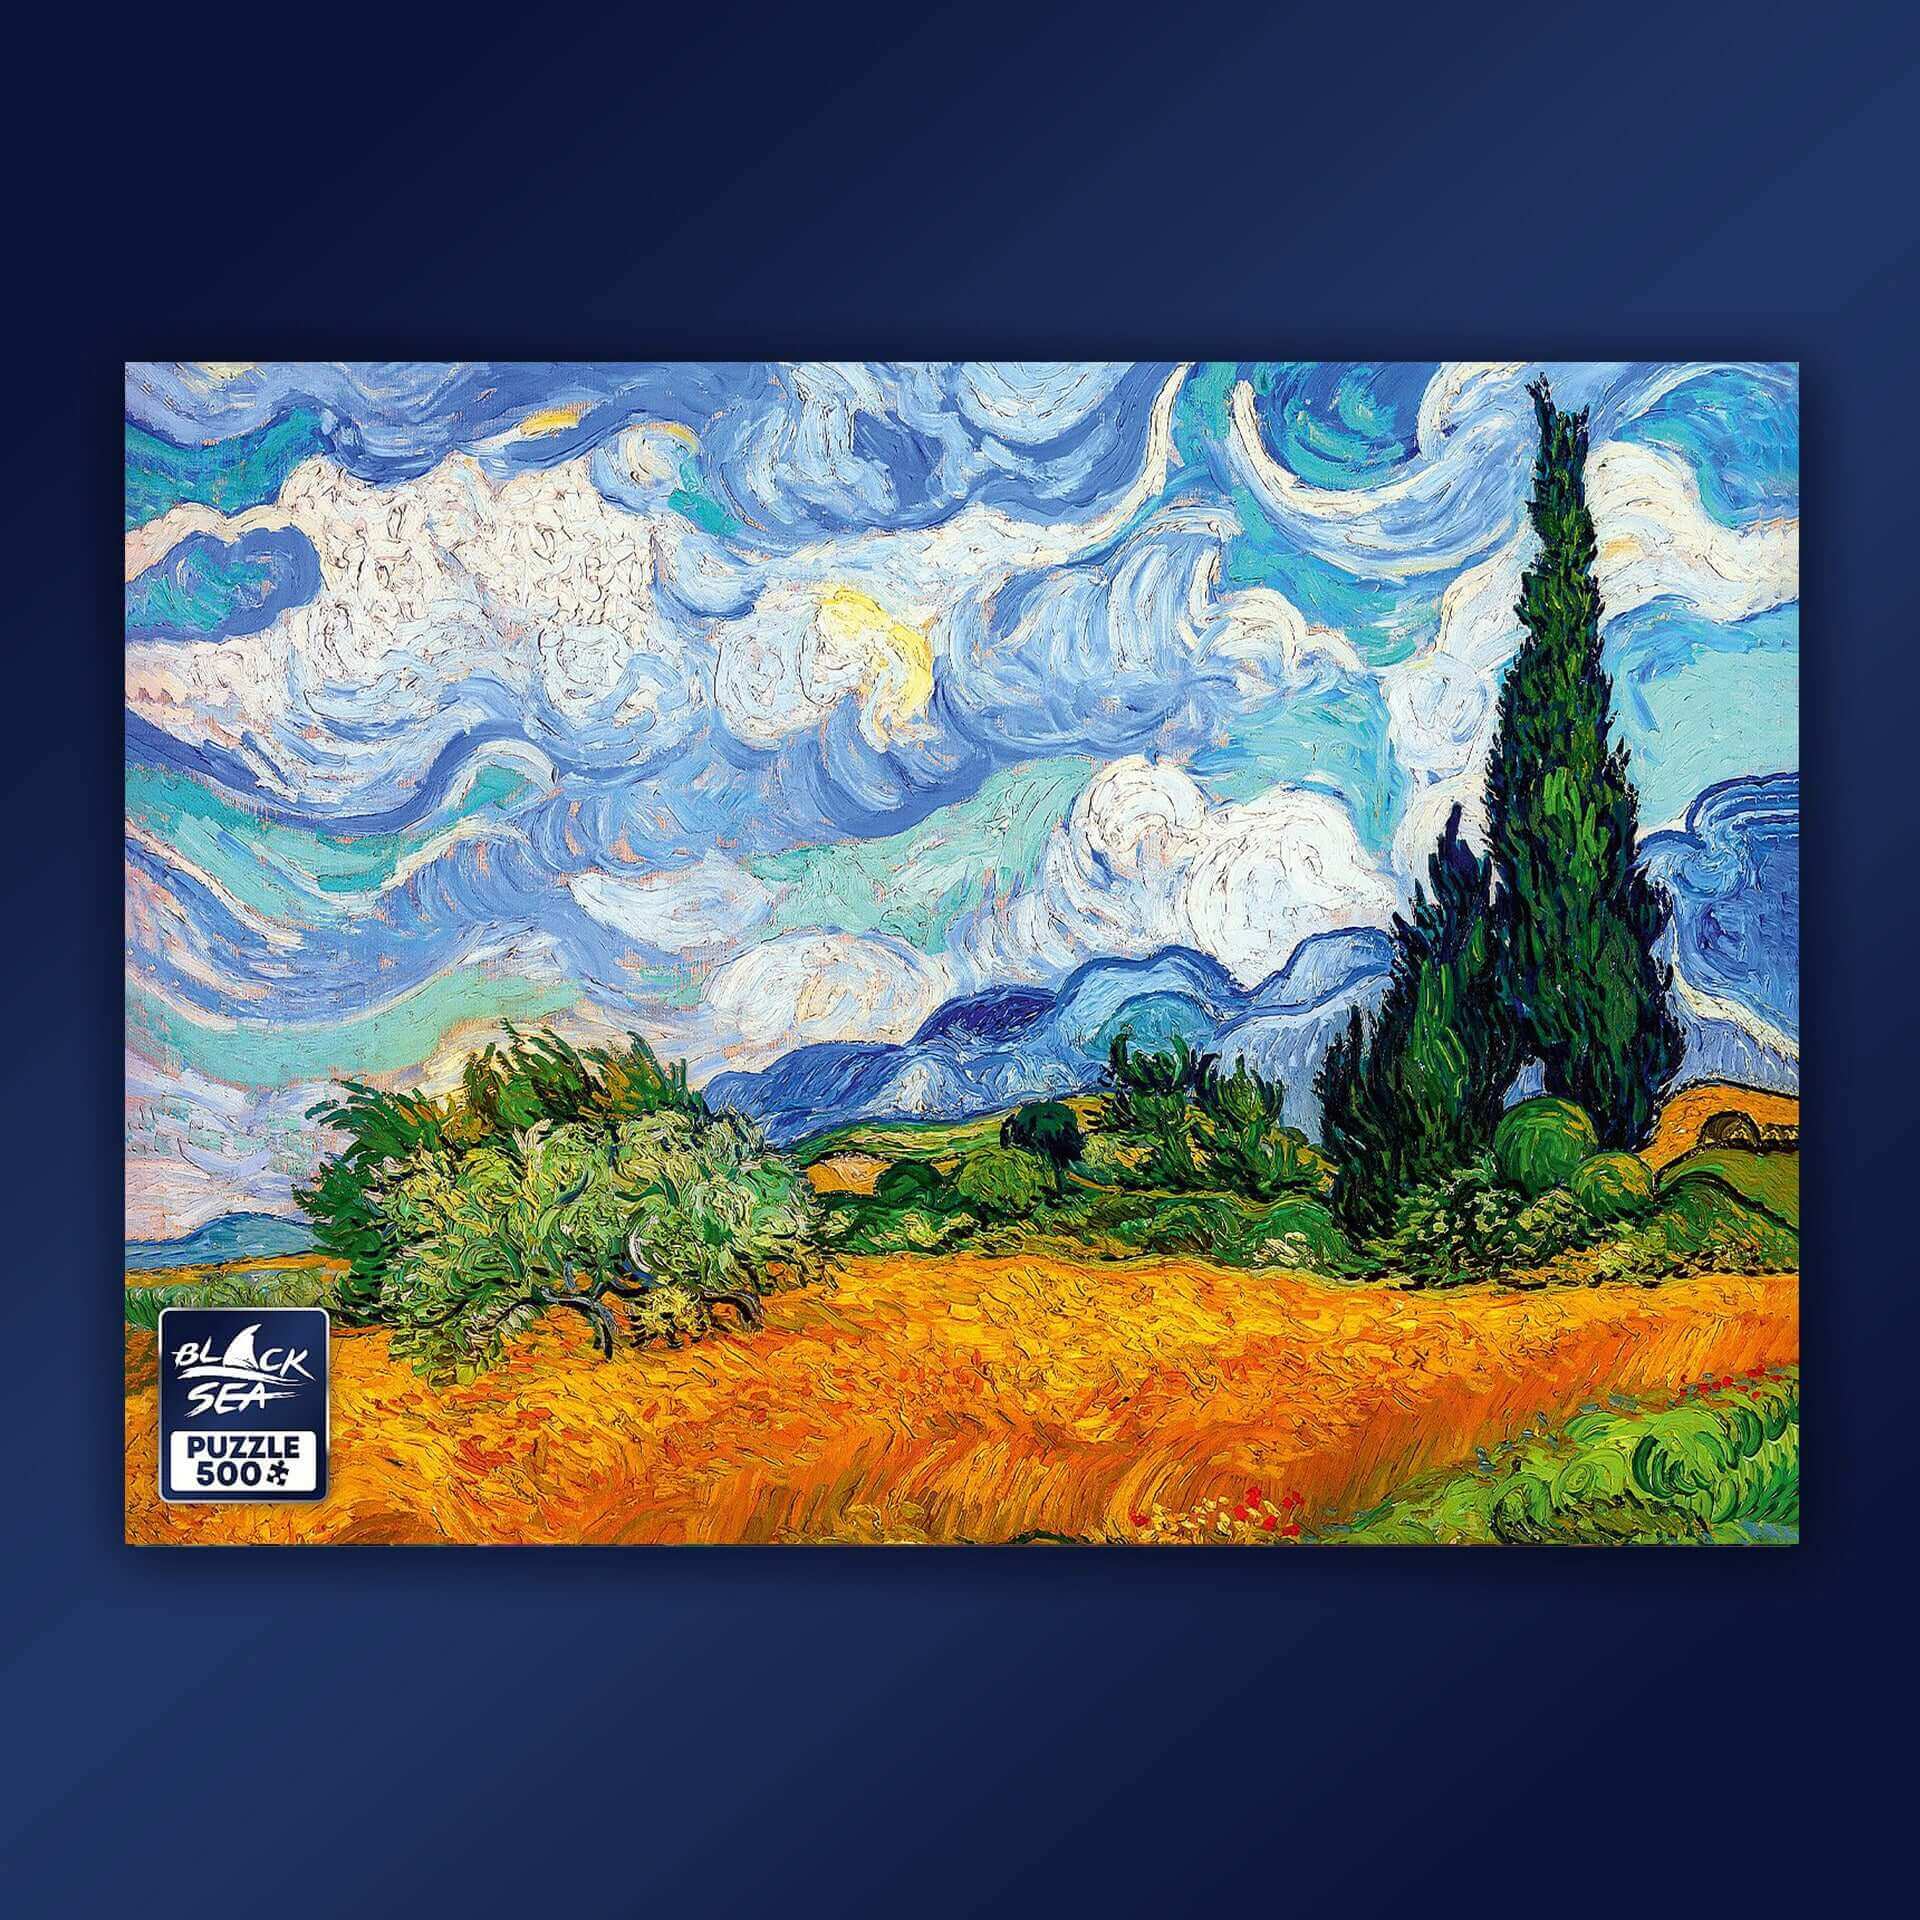 Puzzle Black Sea 500 pieces - A Wheatfield with Cypresses, -